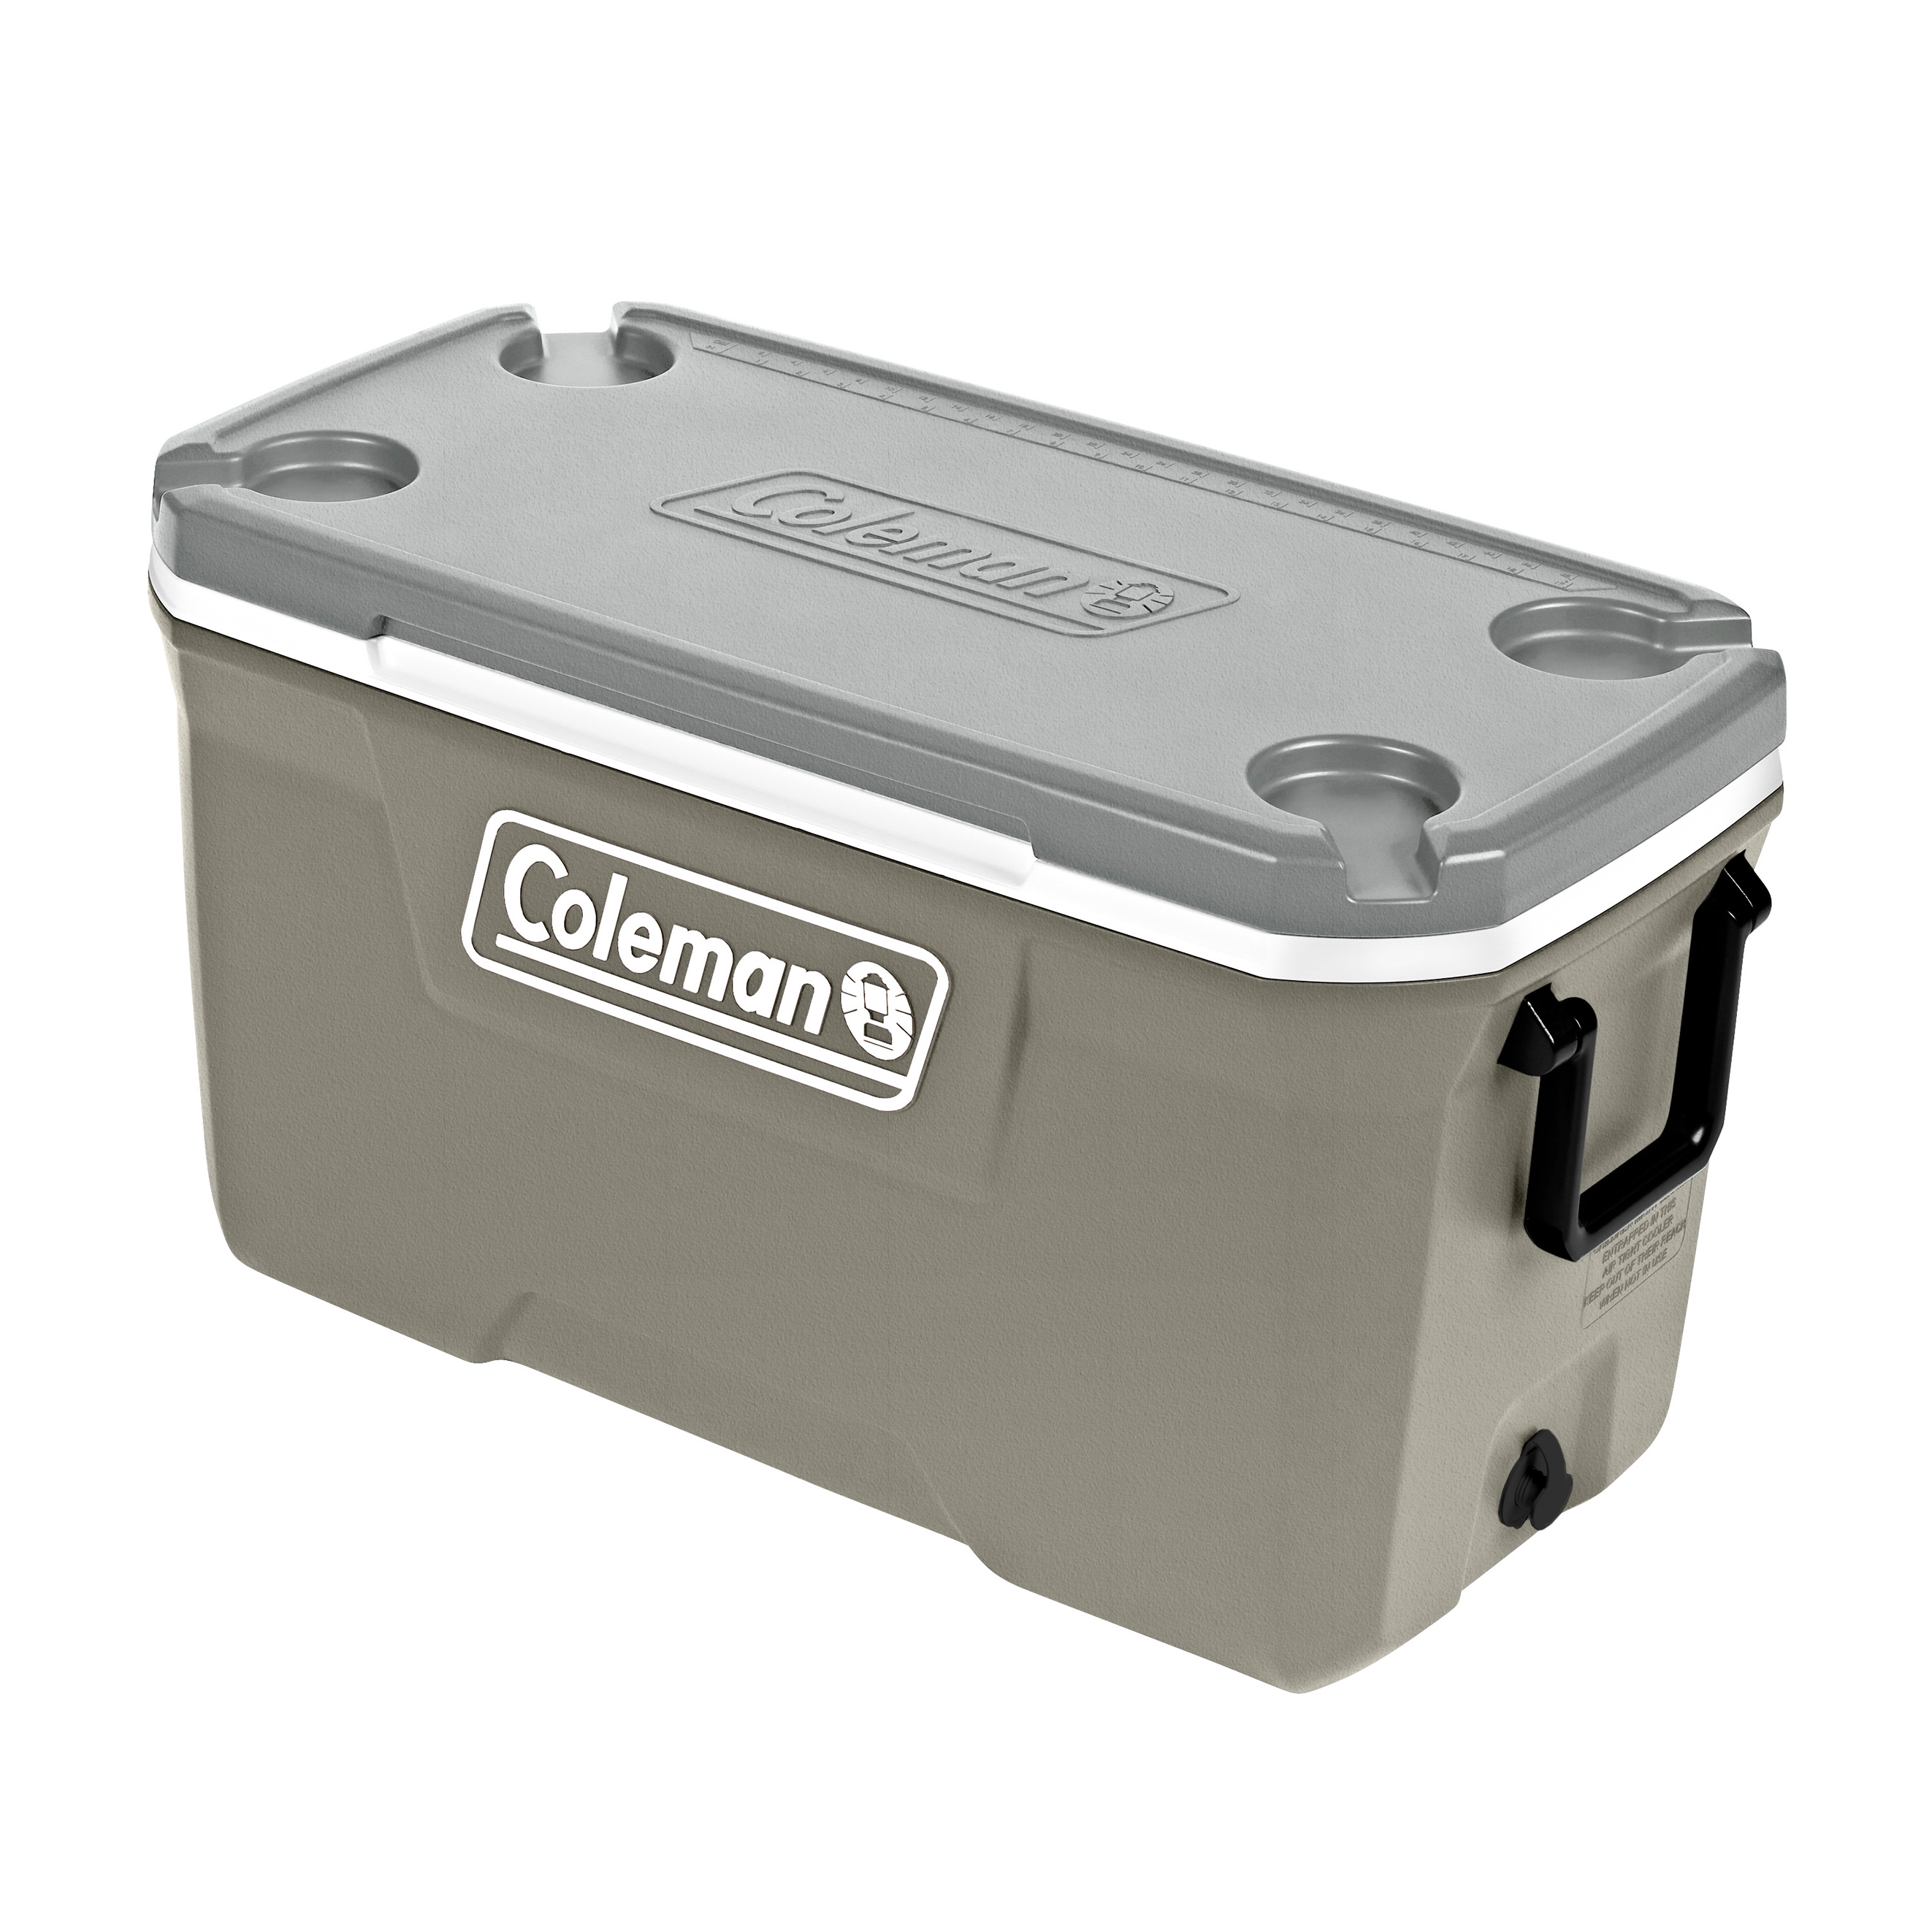 Coleman 316 Series 70QT Hard Chest Cooler, Silver Ash - image 2 of 11